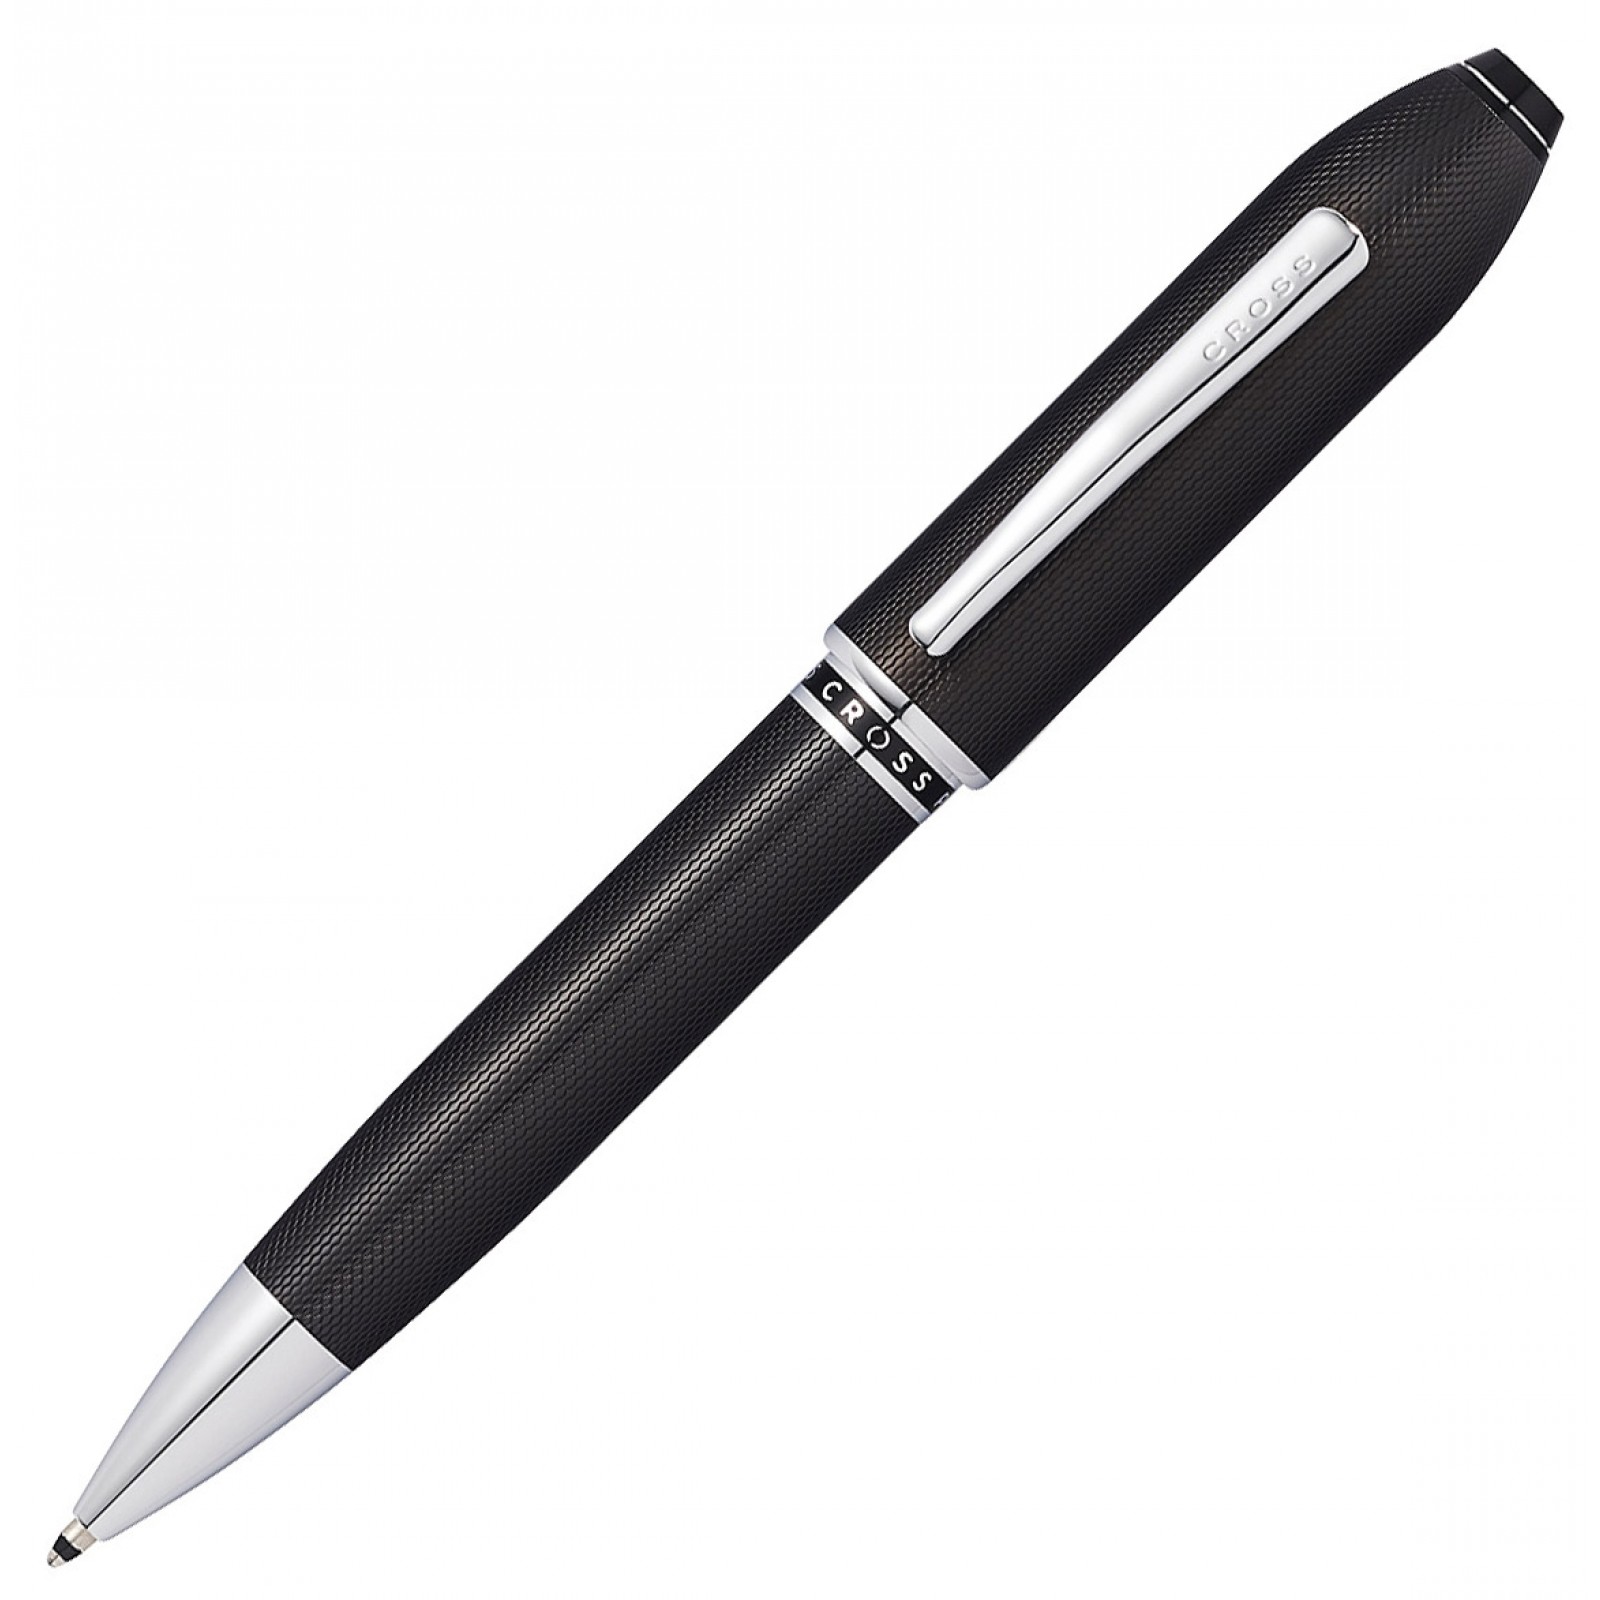 This Article is about the SMART TRACK ABLE PEN. Cross Peerless Tracker Ballpoint Pen can track any time with its tracking app. it also has bluetooth and Camera.